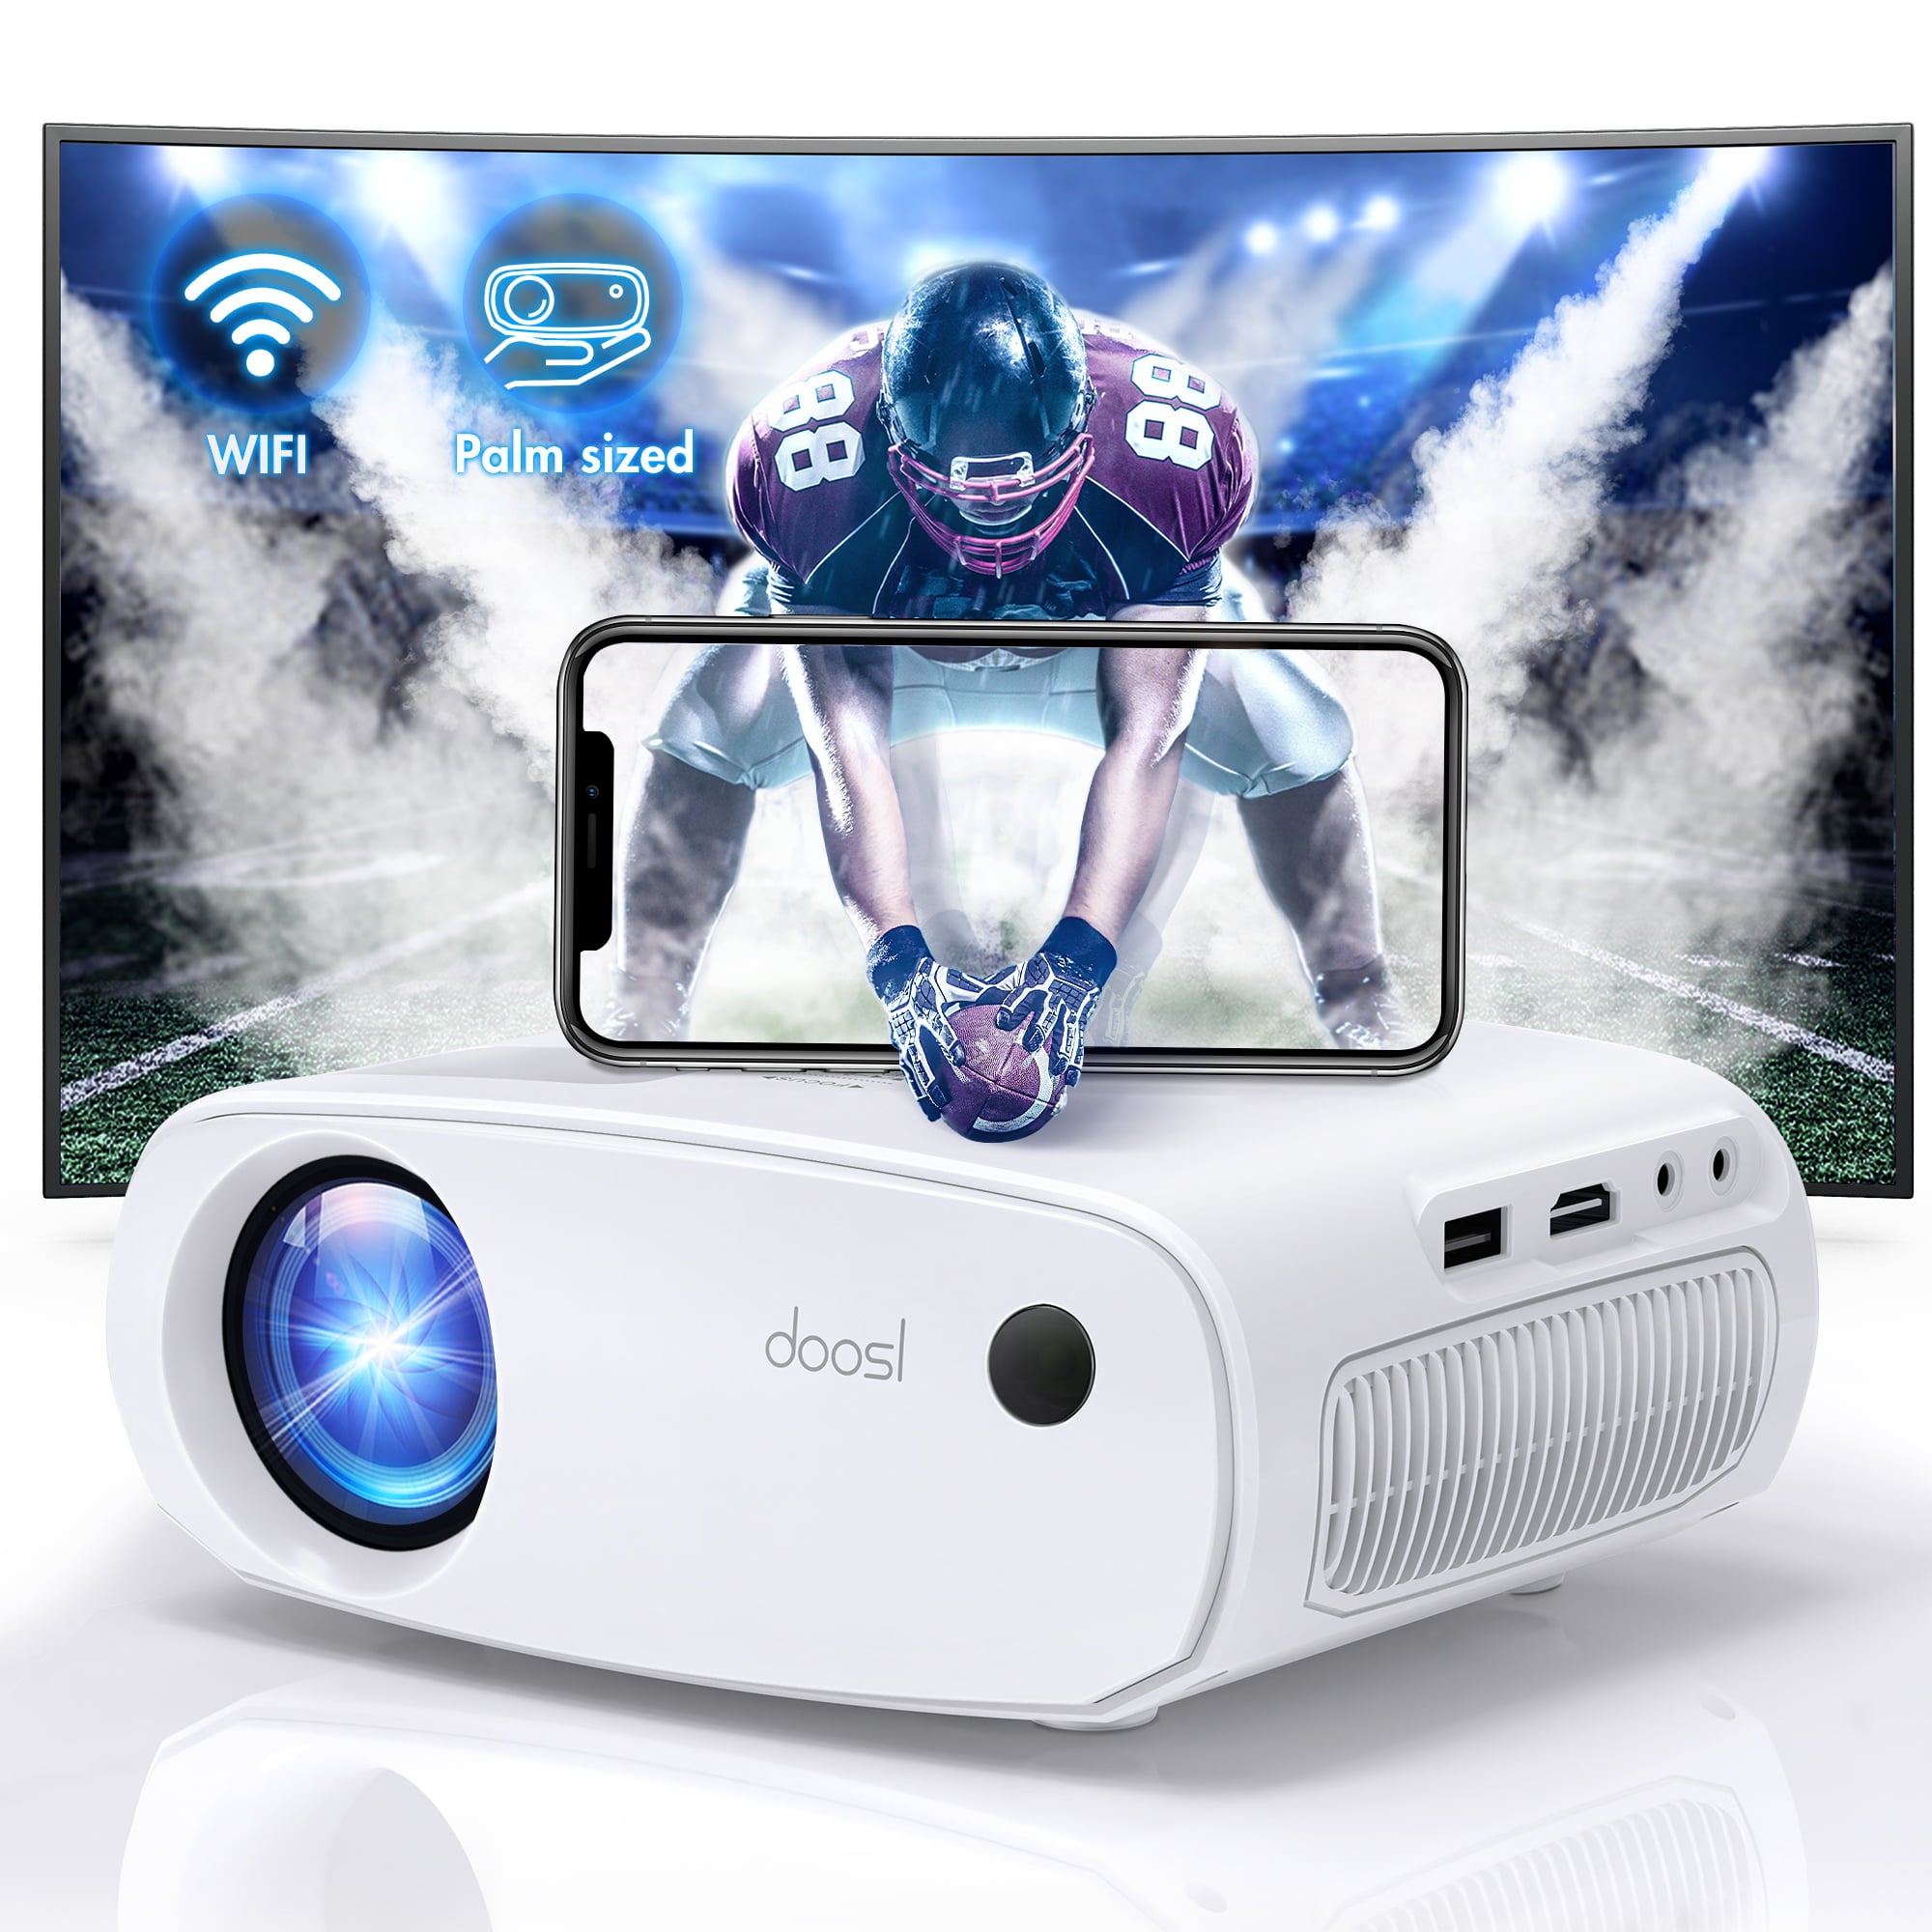 Doosl Mini Wifi Projector, Portable Outdoor Movie Projector for iPhone, LCD Full HD 1080P Supported, 66,000 Hours LED Lamp Life, Home Theater Projectors Compatible with iOS Android Phone, White